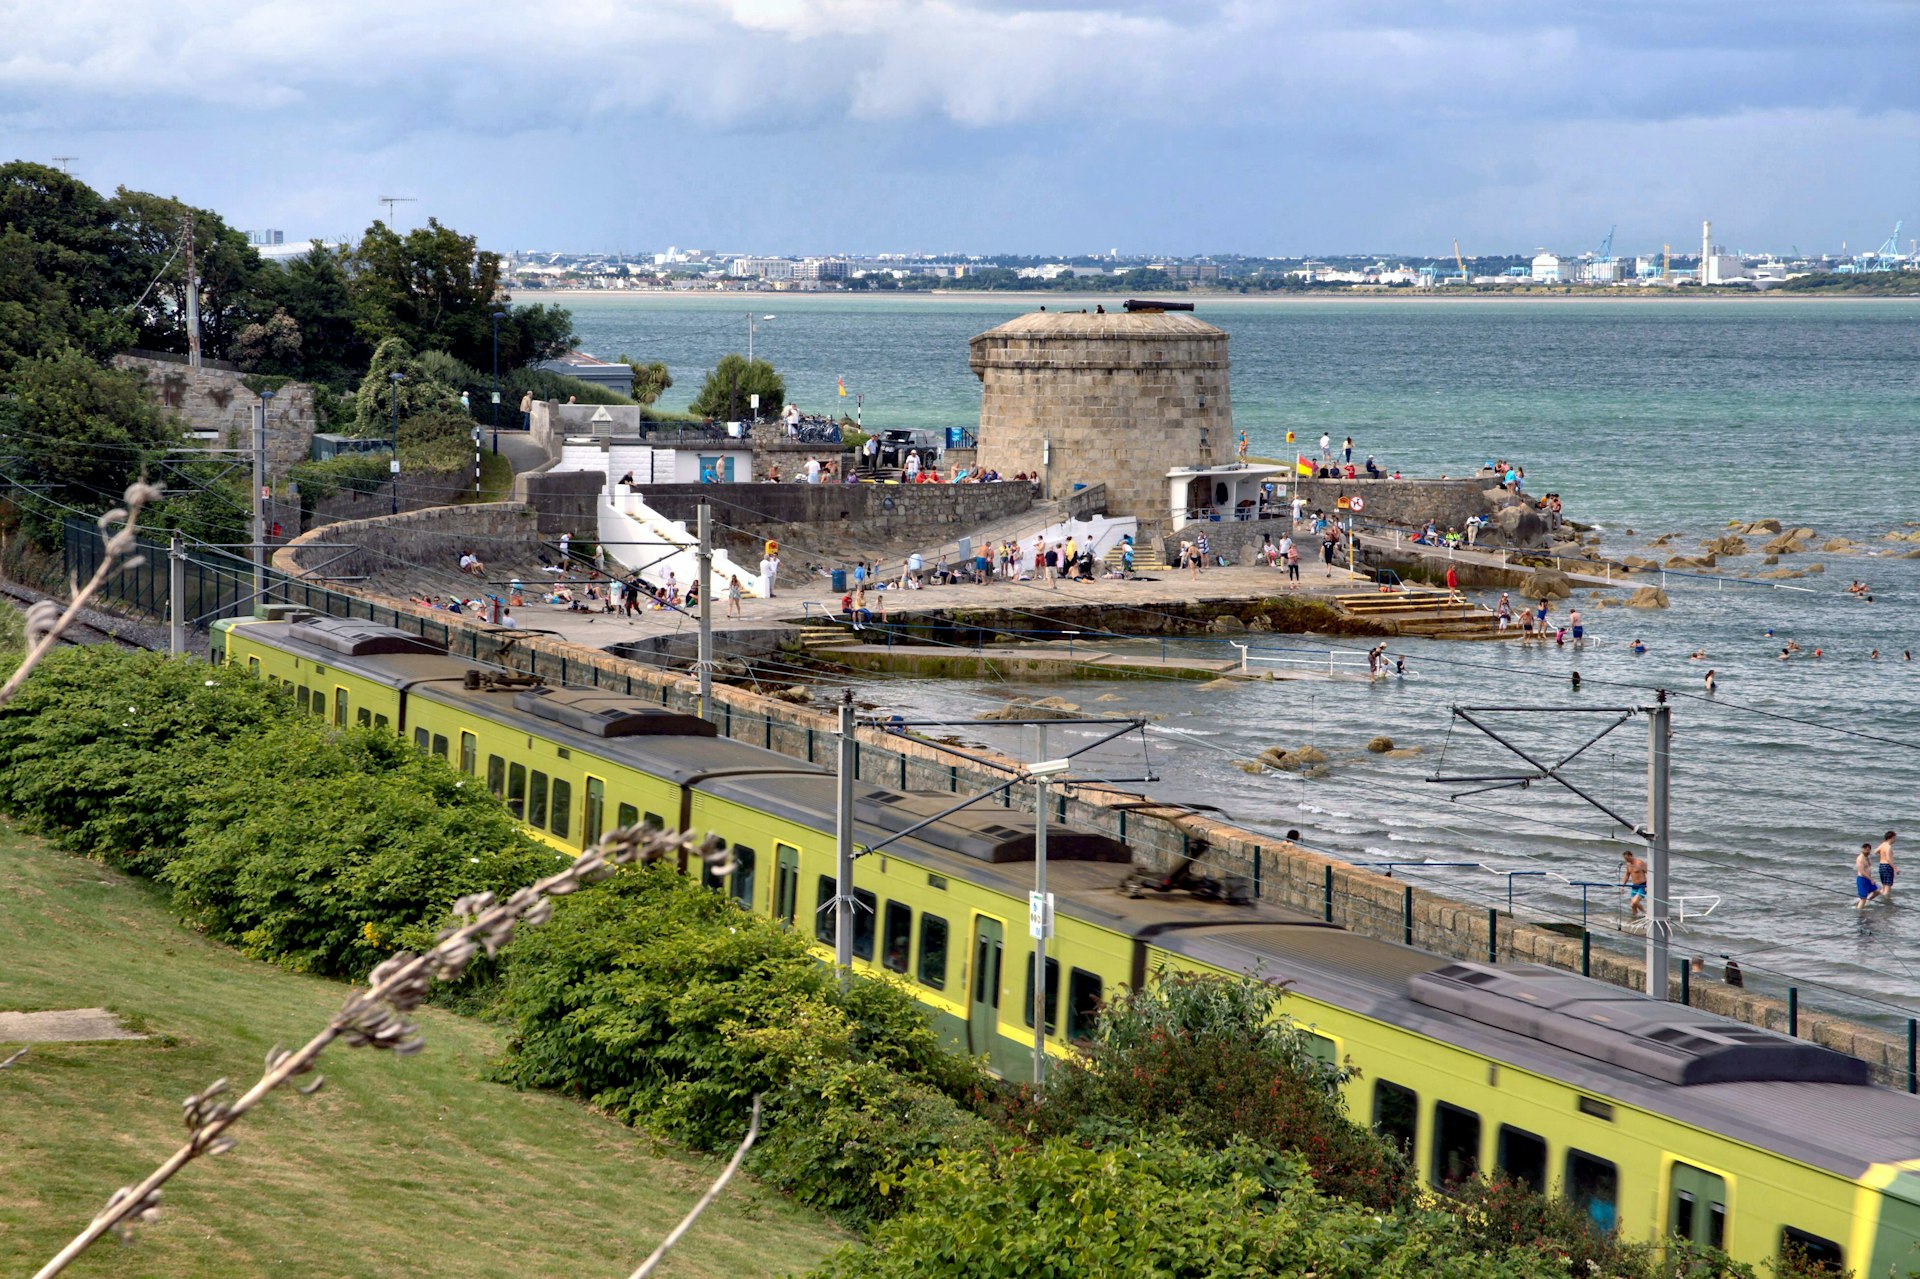 A DART train passes by a busy Seapoint Beach on a cloudy day in Dublin